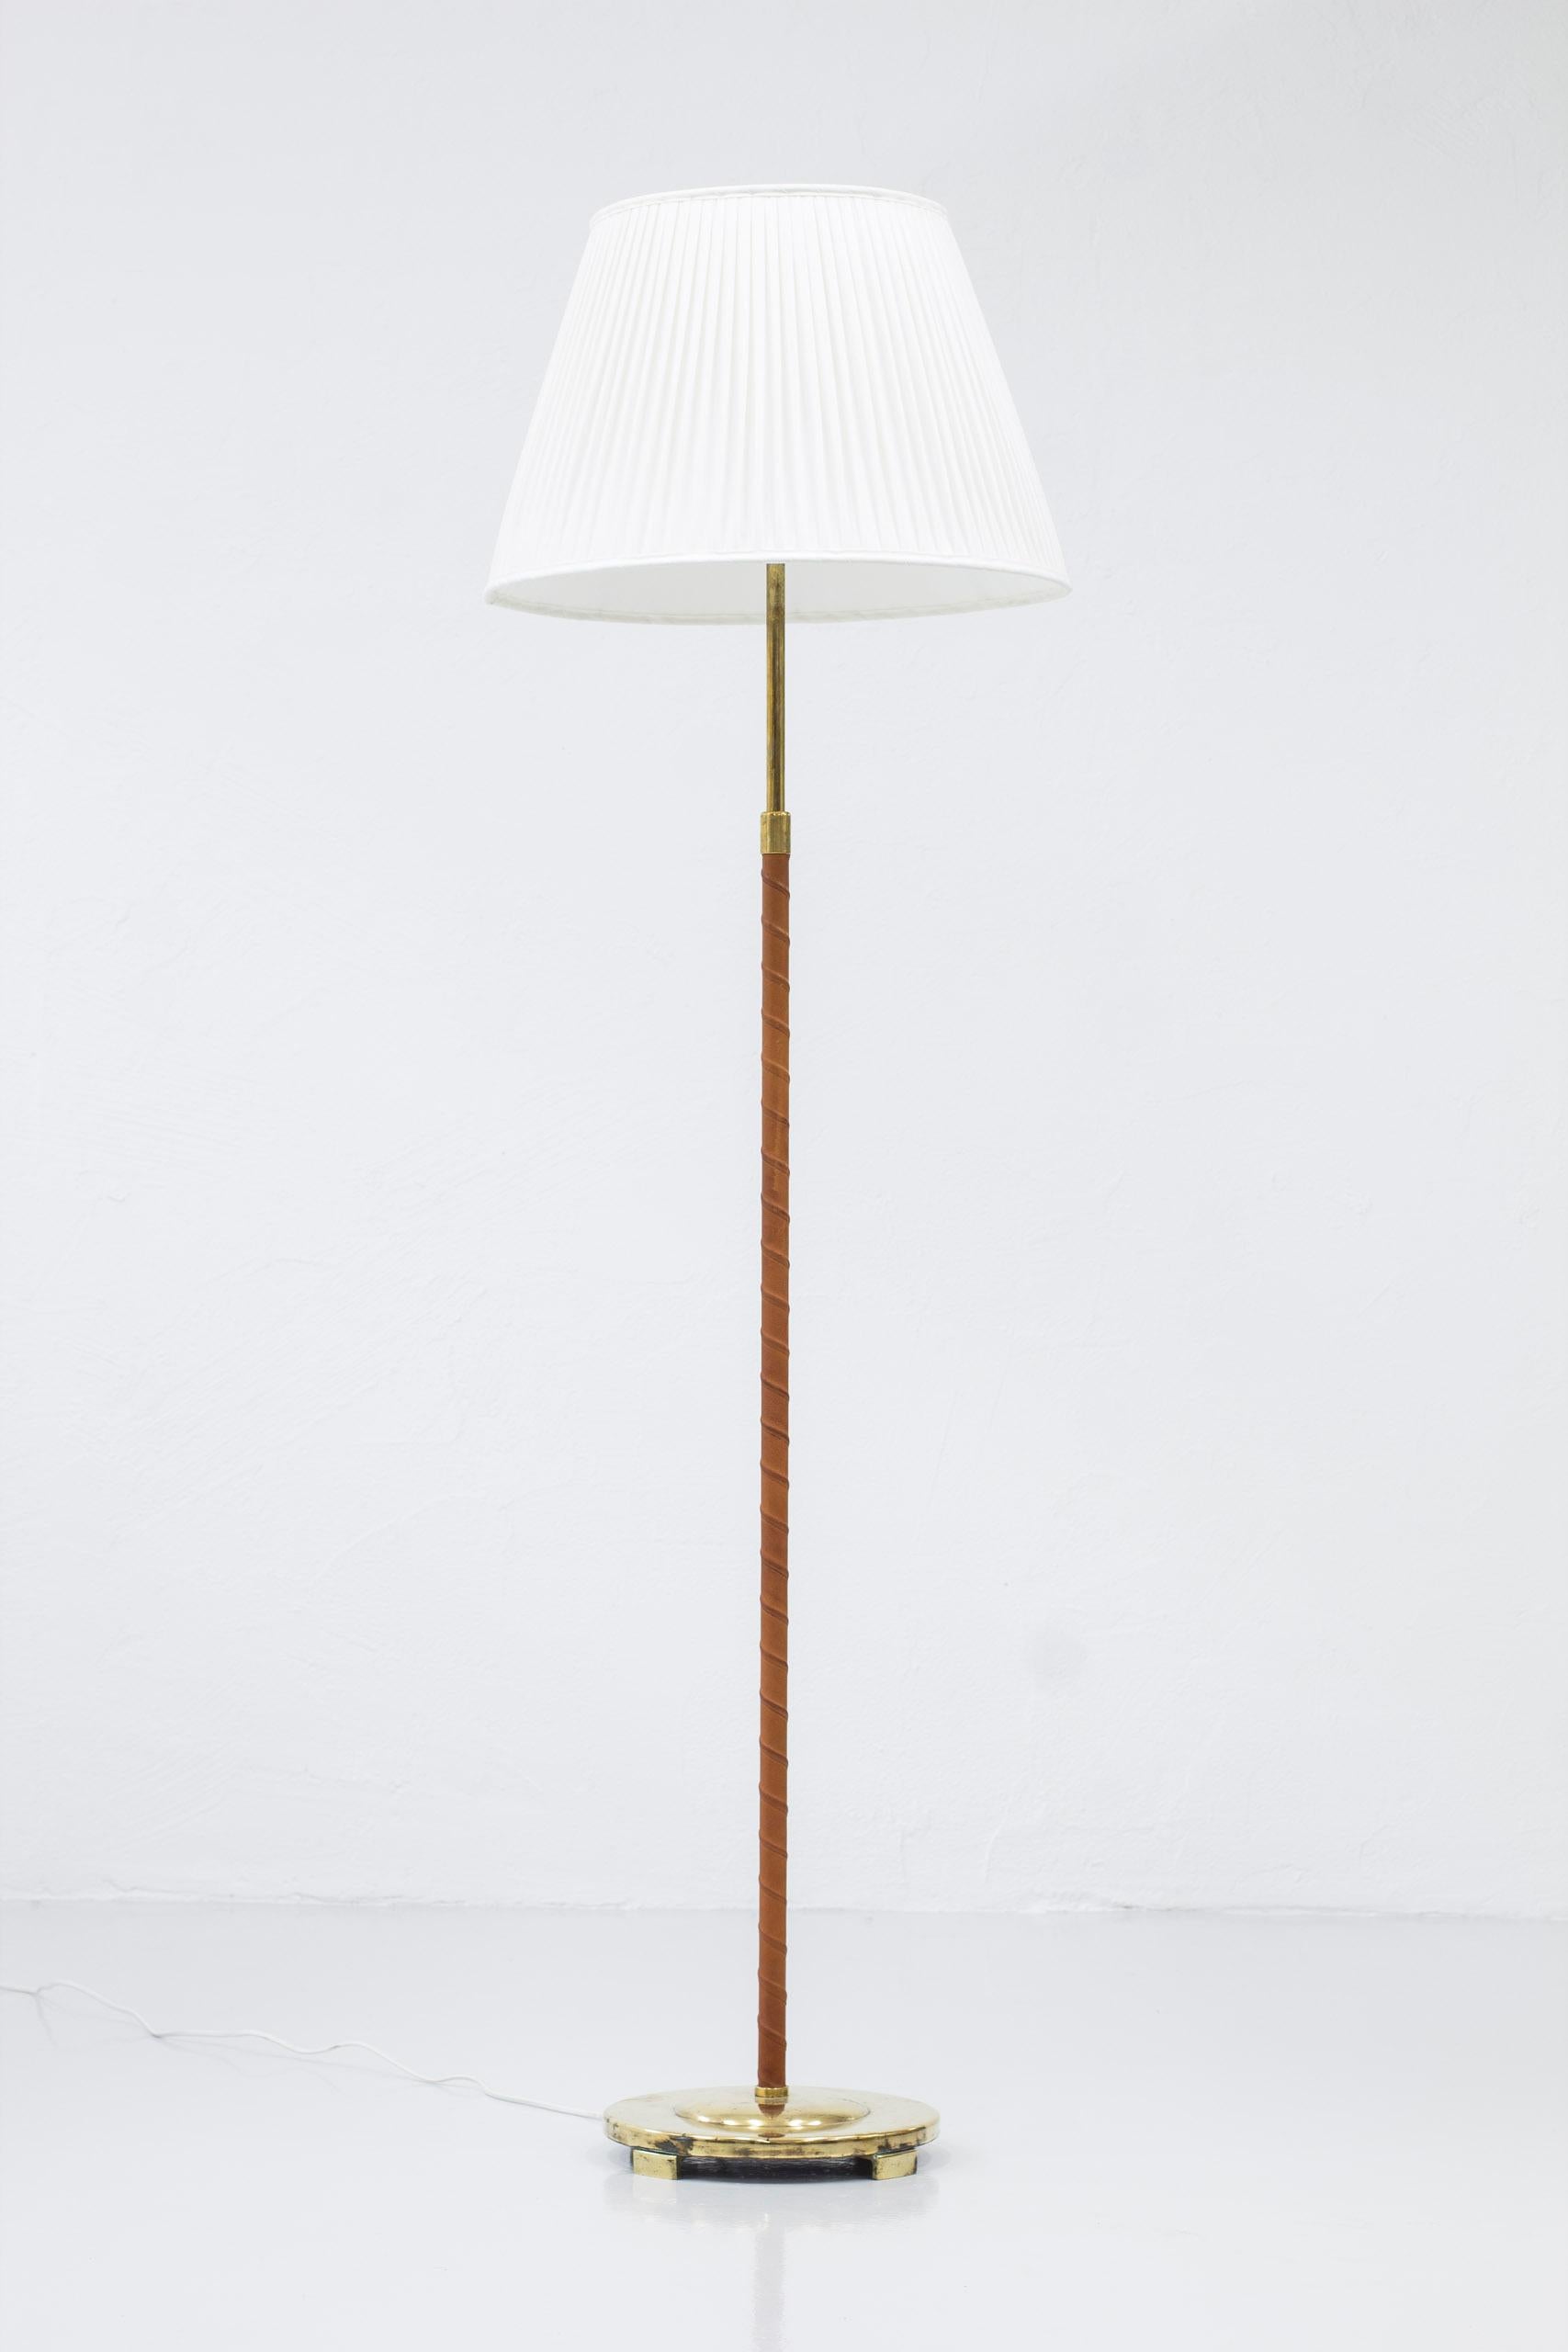 Floor lamp model 32753 produced by Nordiska Kompaniet. Attributed to the head designer for the NK lighting department Bertil Brisborg. Produced around the 1940s. Made from brass, lacquered metal and leather. The shade is redone after the original